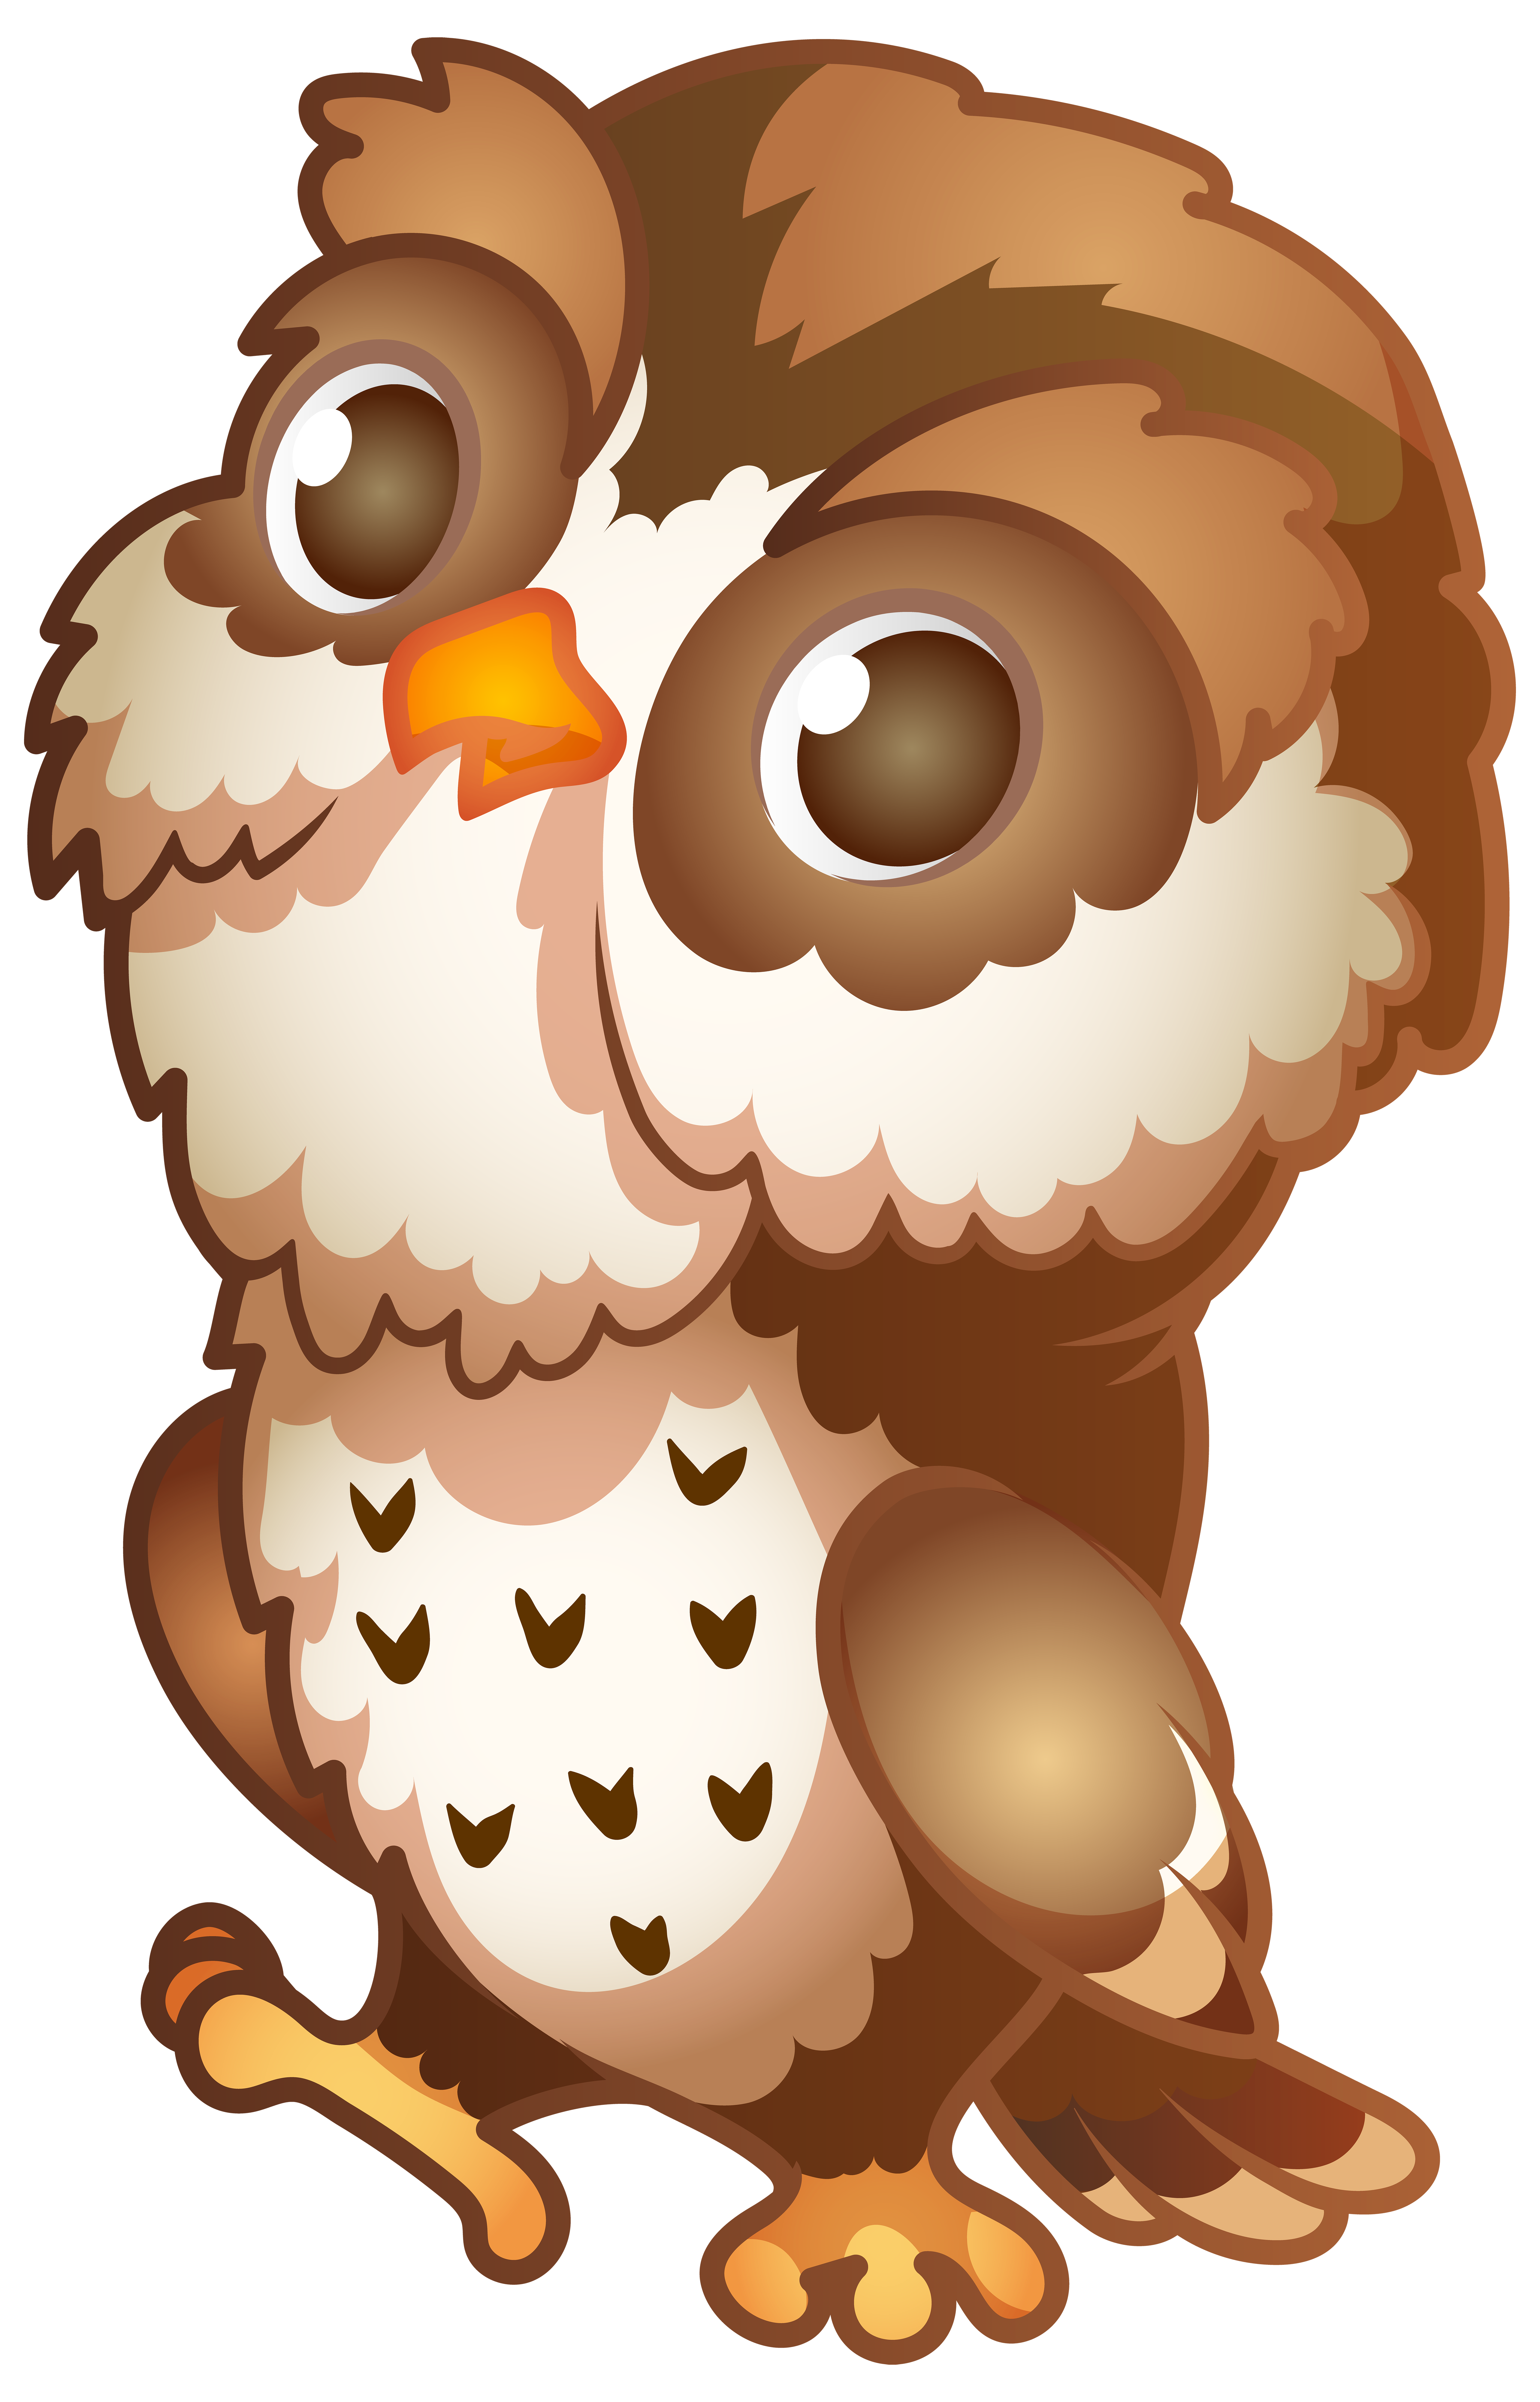 Owl Cartoon PNG Transparent Image​ | Gallery Yopriceville - High-Quality  Free Images and Transparent PNG Clipart